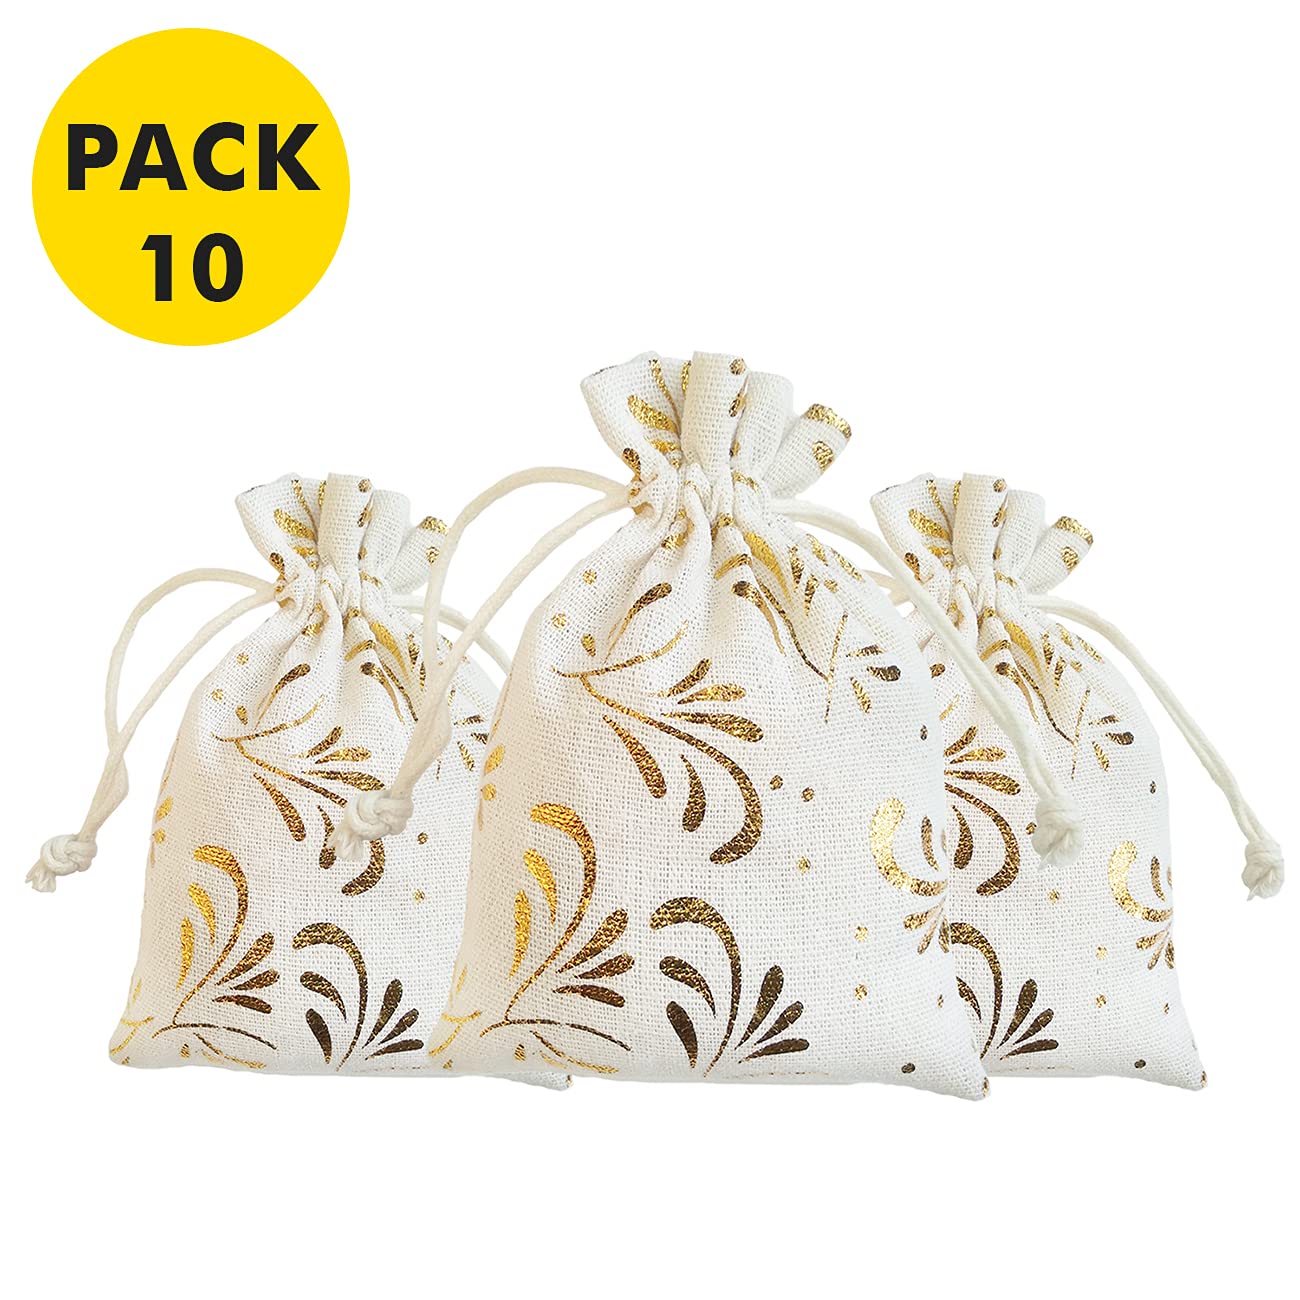 Cotton Printed Drawstring Gift Bags Return Gifts Bags for Festivals, Functions LifeKrafts